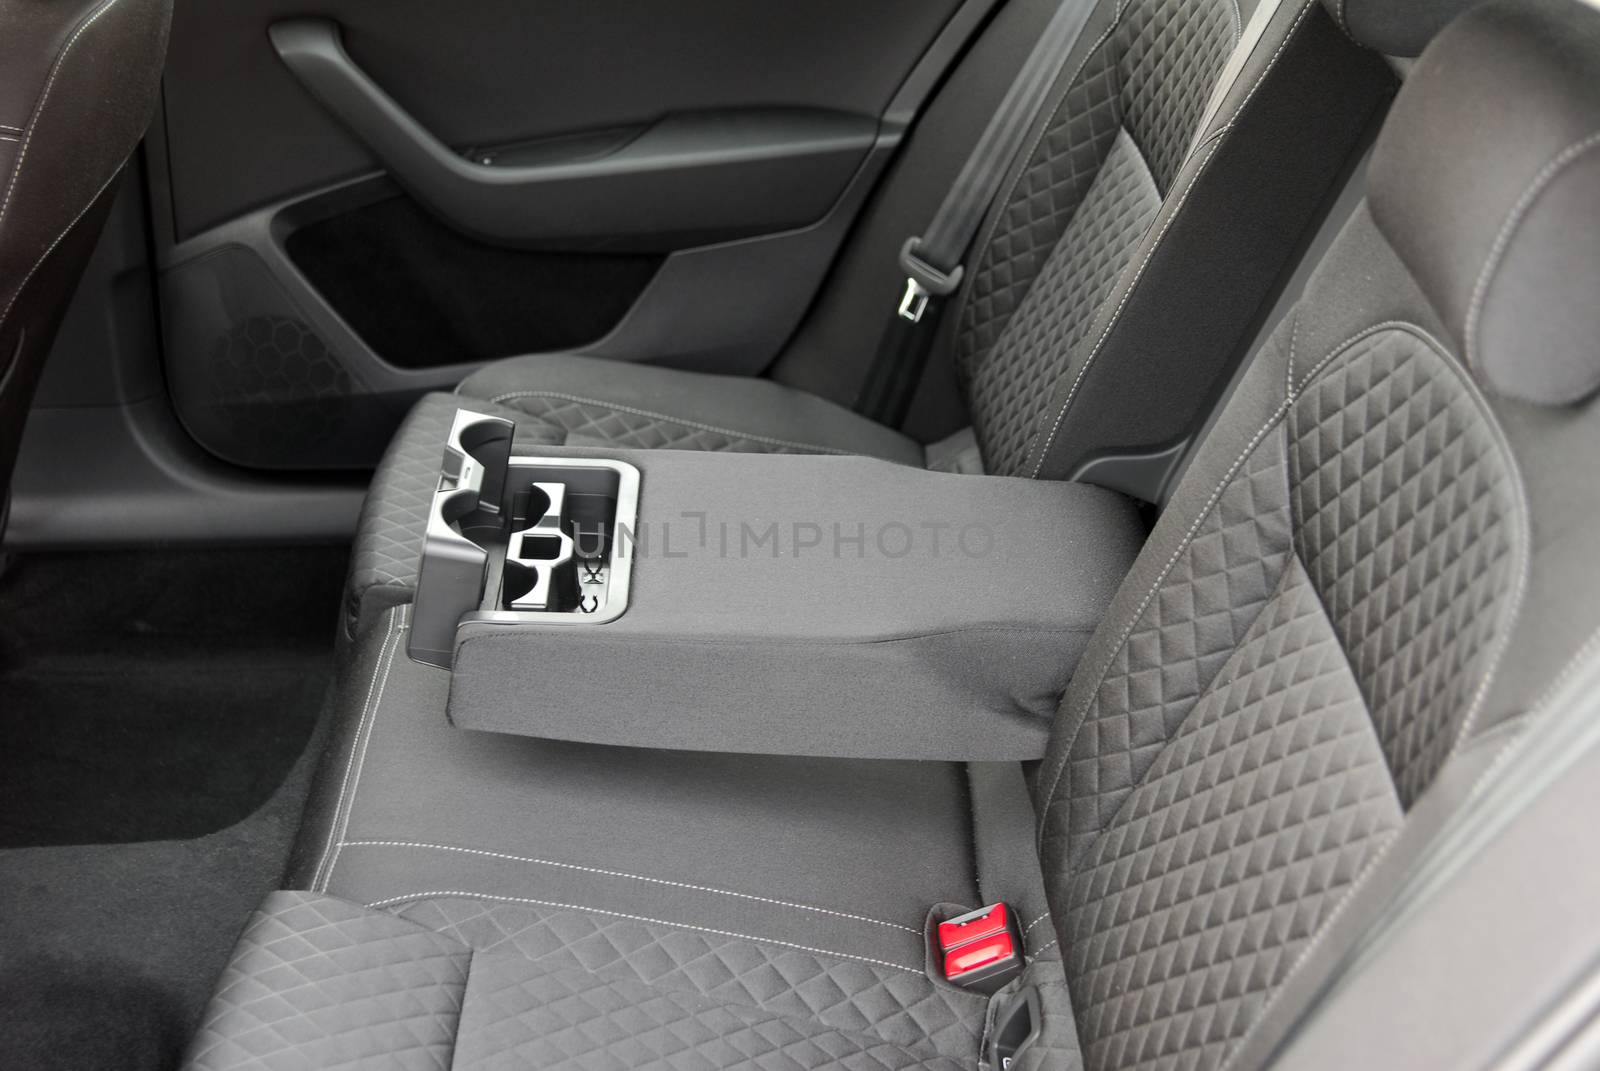 armrest in the luxury passenger car, rear seats by aselsa